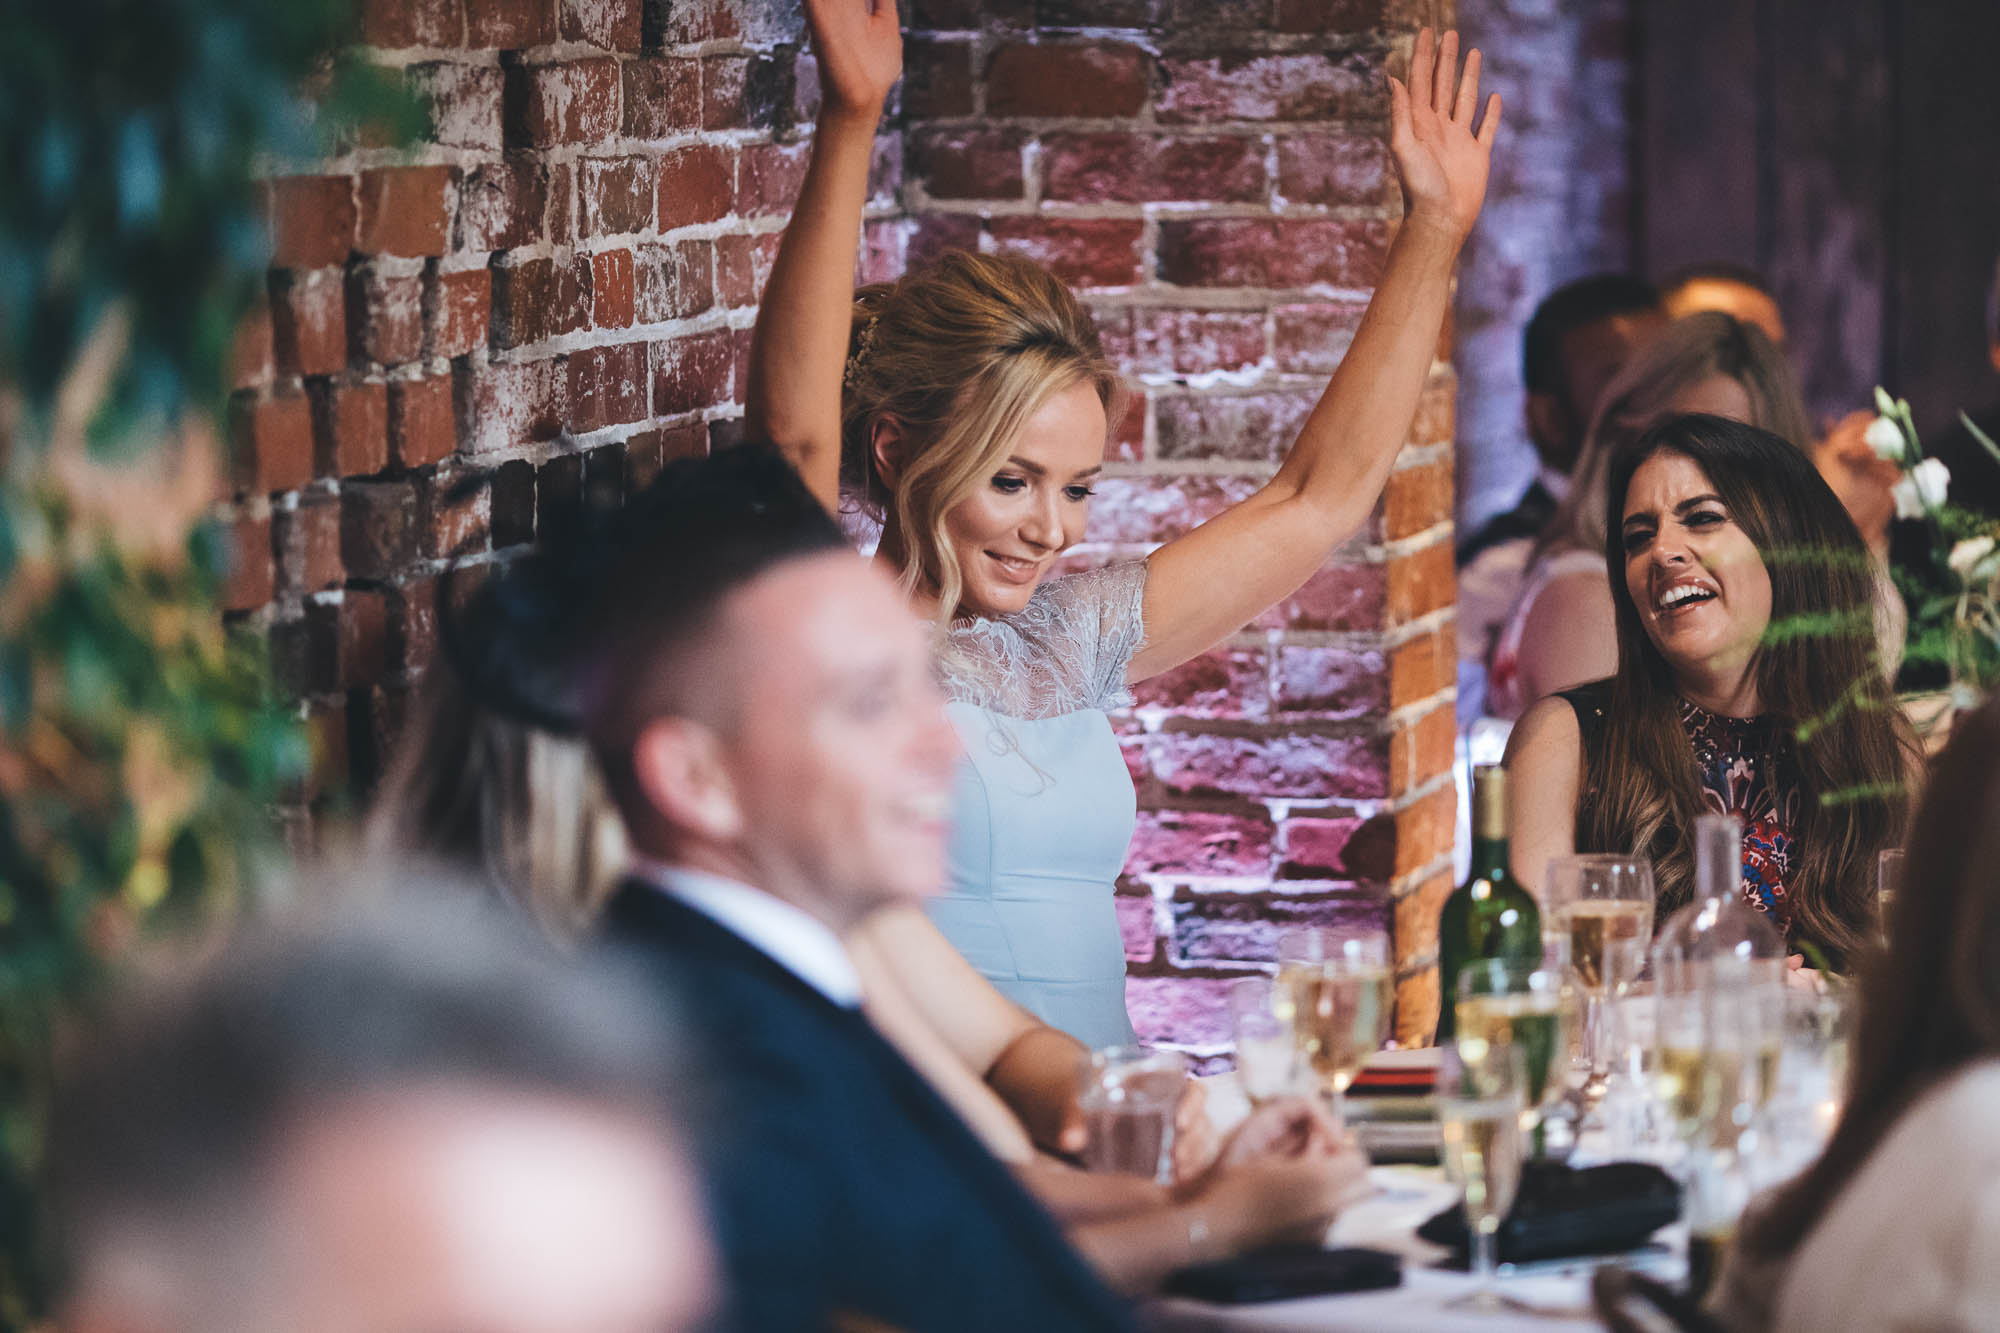 Bridesmaid gets into the party spirit at wedding reception